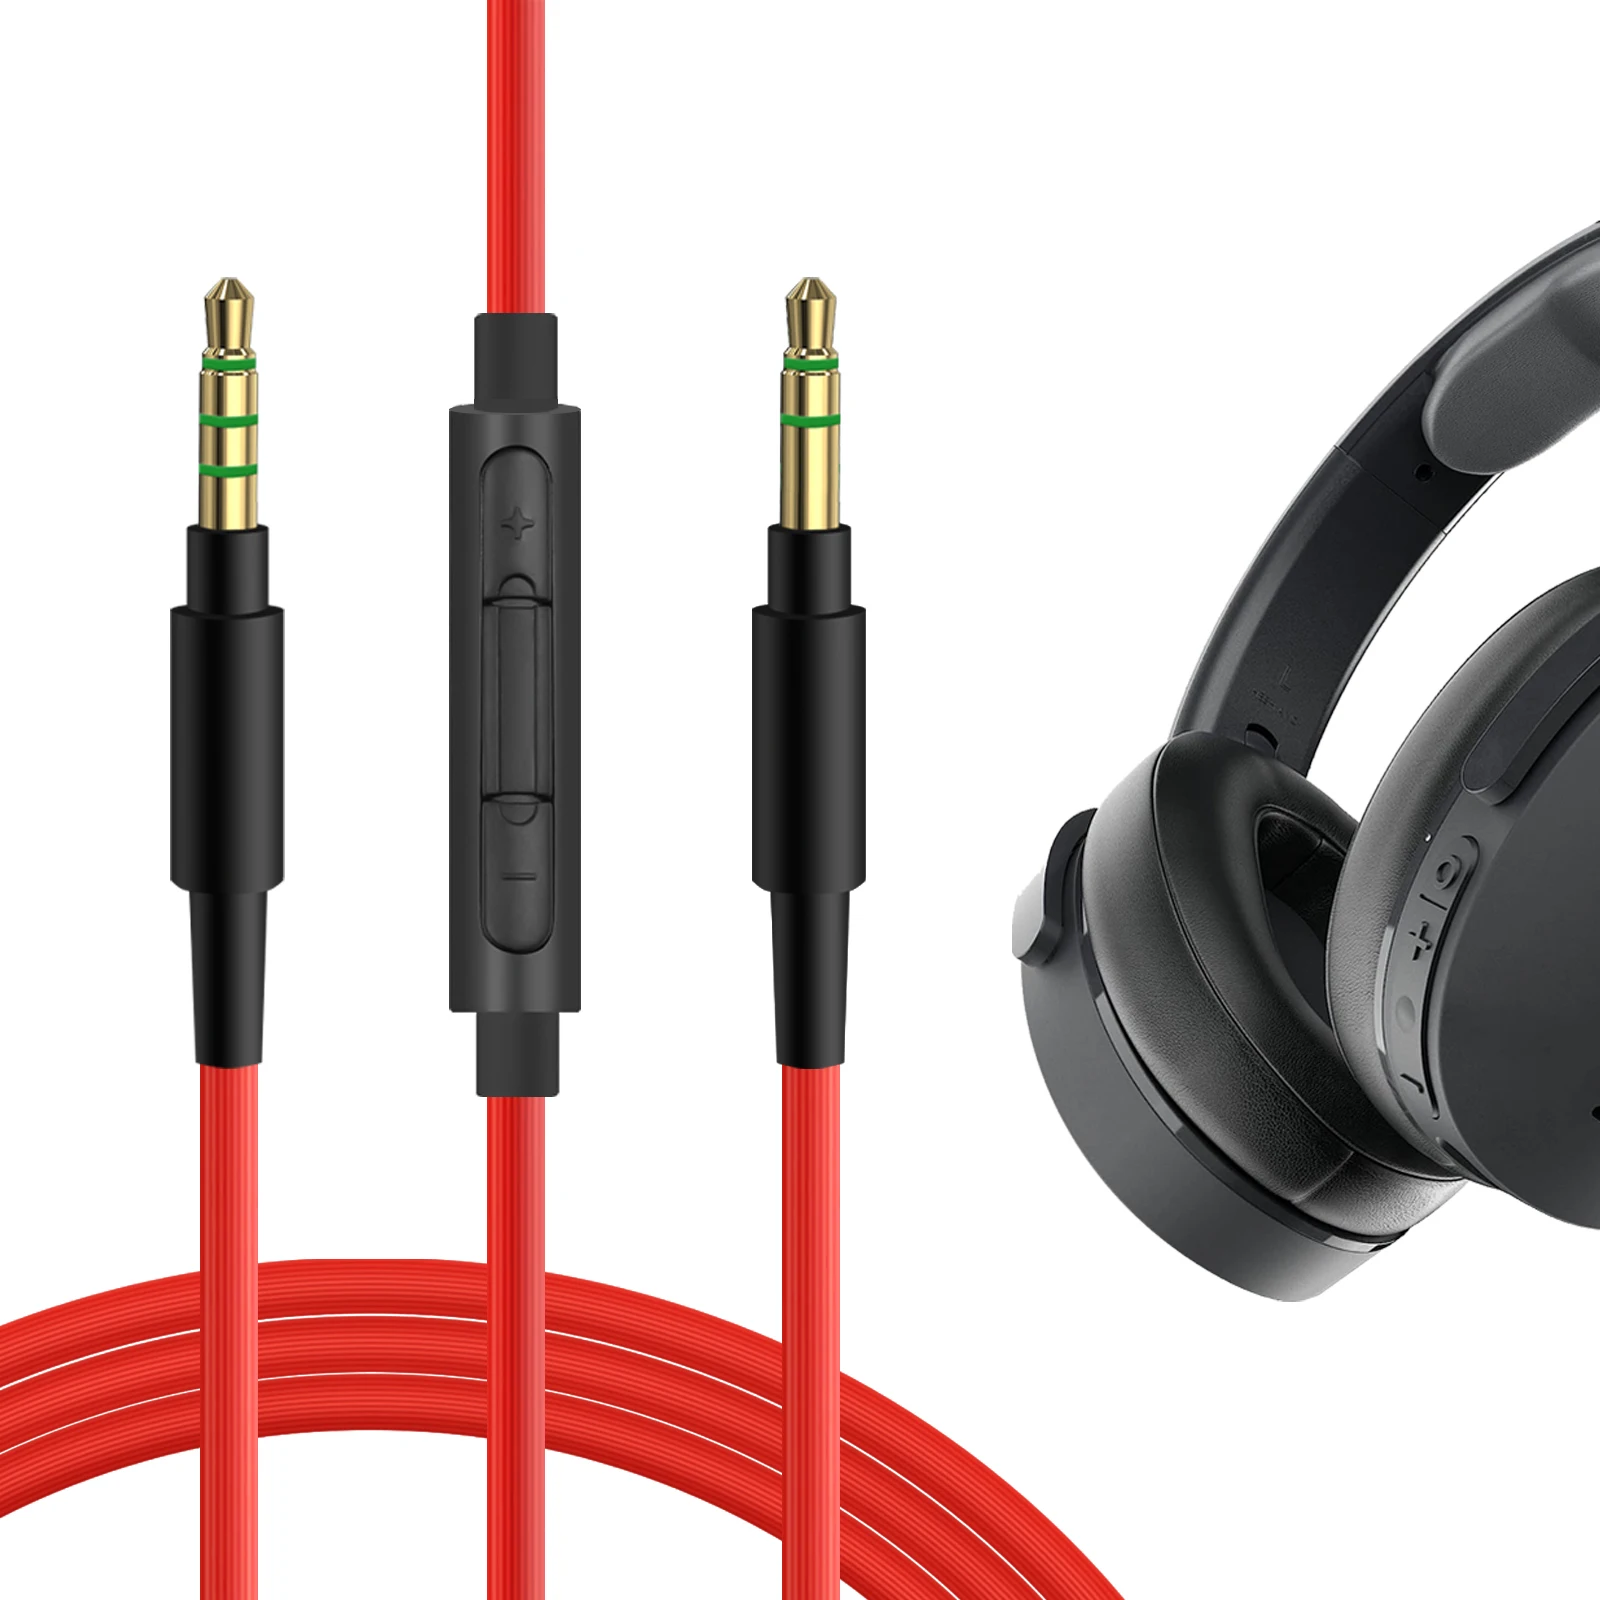 

Geekria Audio Cable with Mic Compatible with Skullcandy Hesh Evo, Hesh 3, Hesh 2, Crusher EVO, Venue, Grind Cable